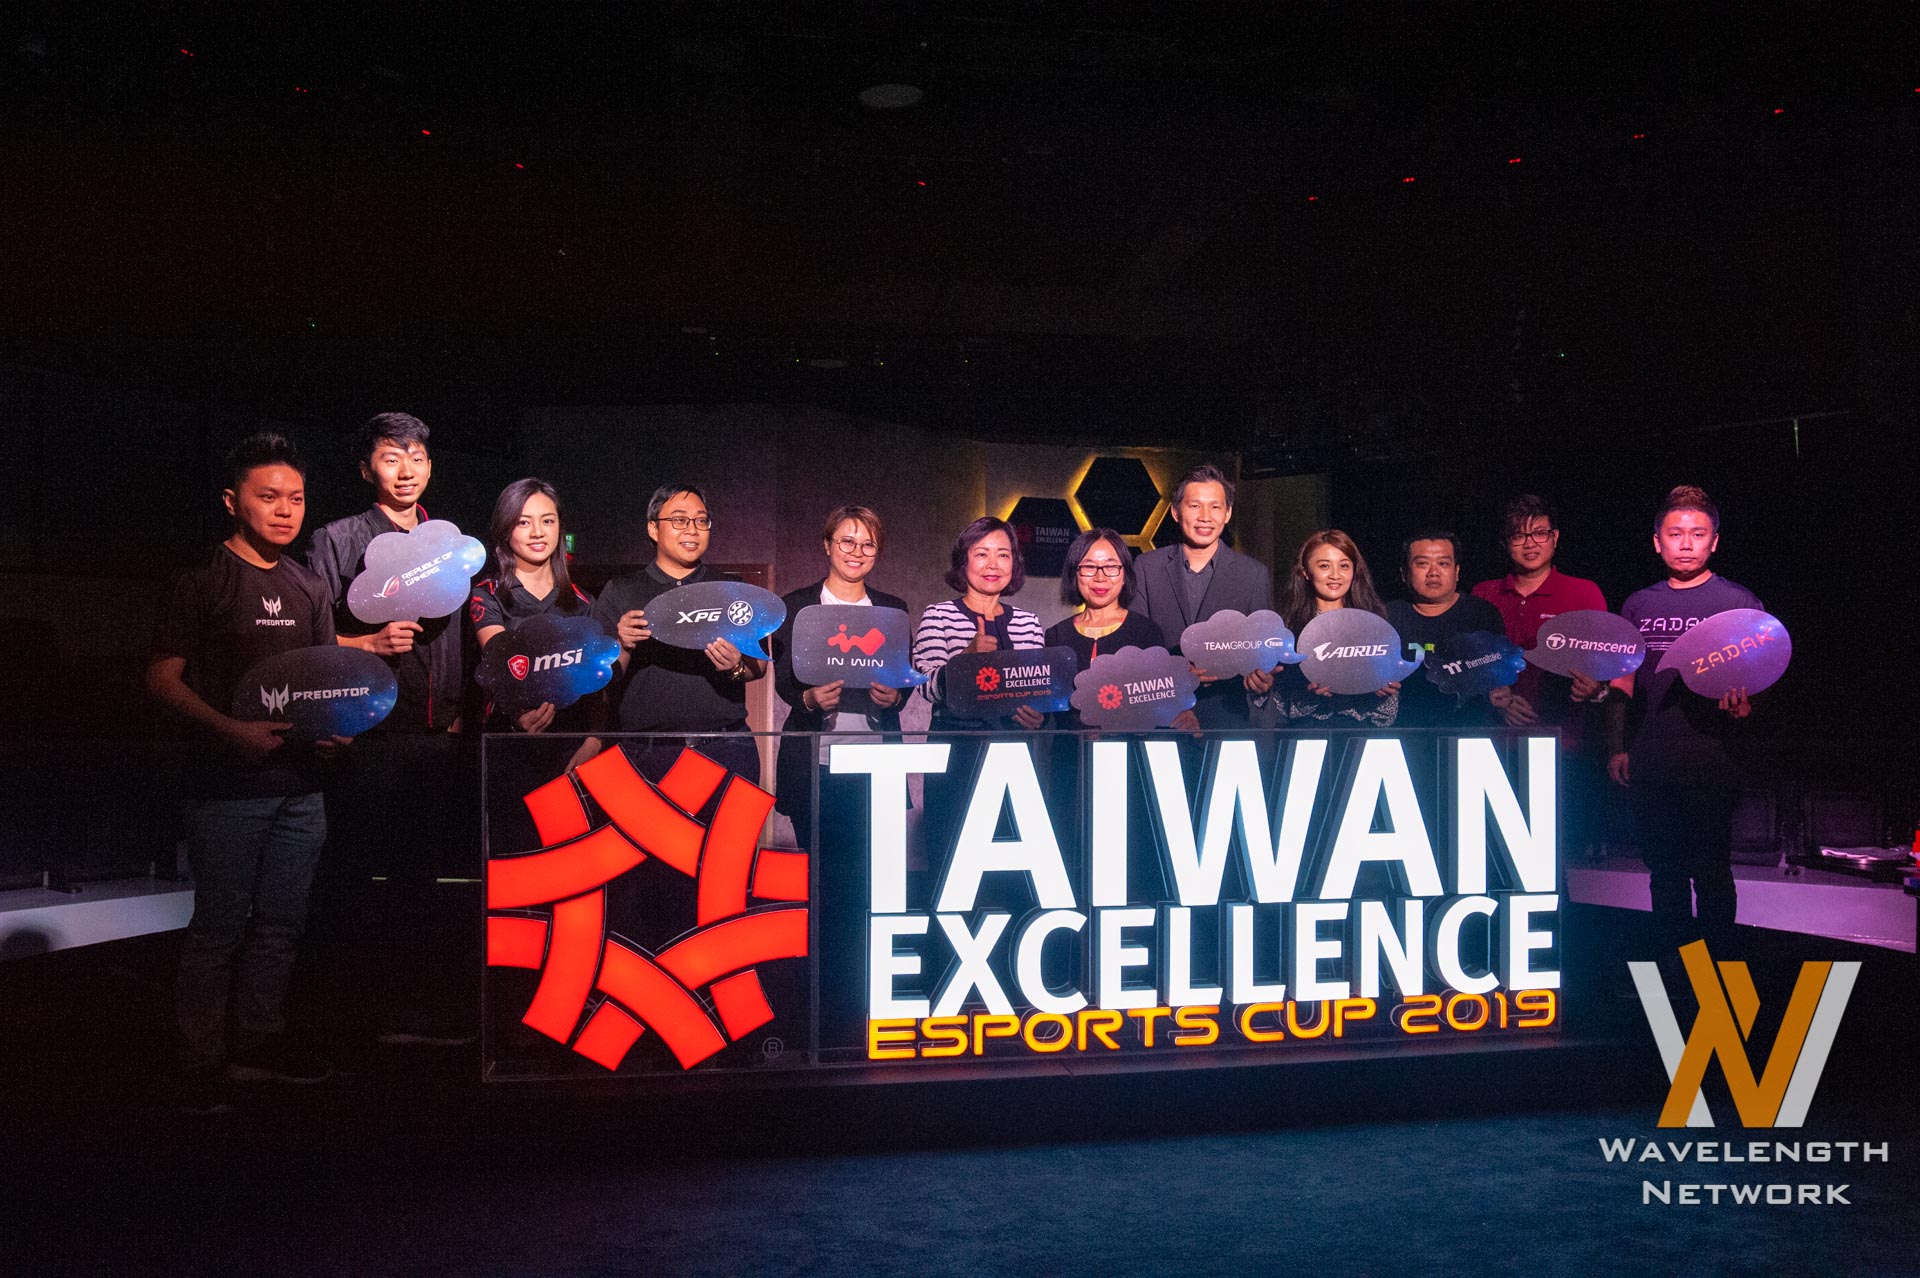 Taiwan Excellence eSports Cup 2019 - 06